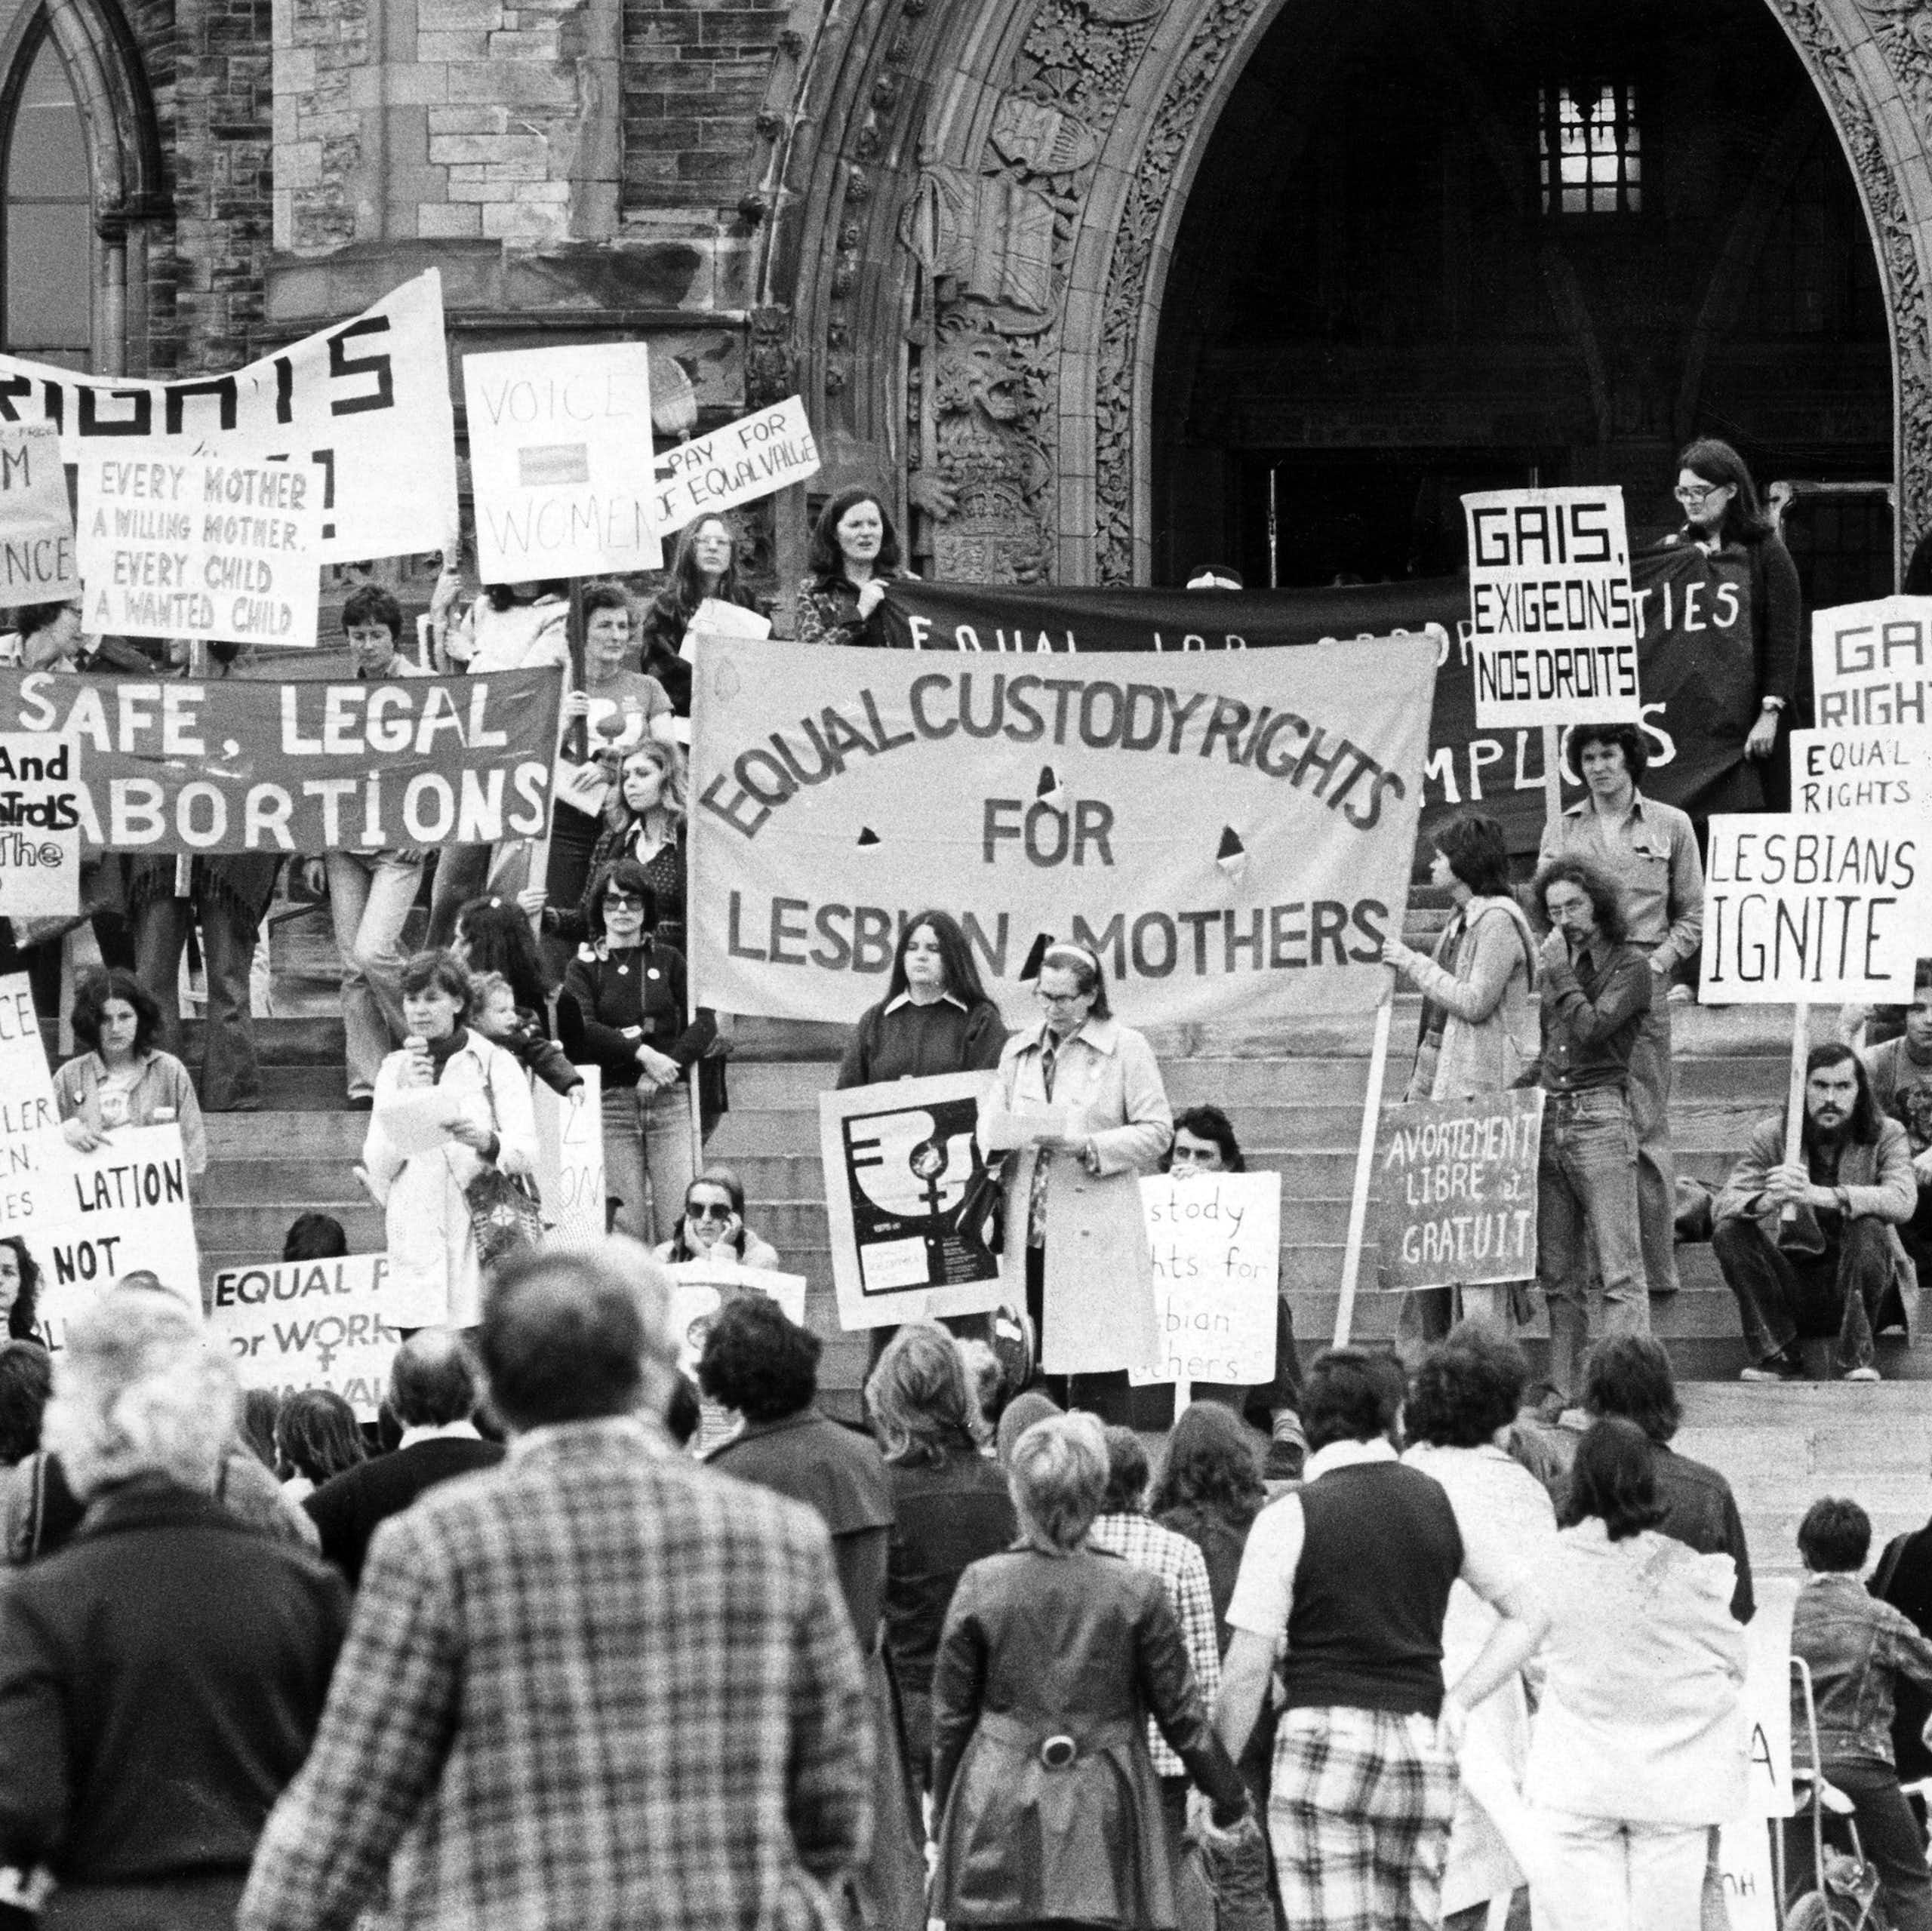 A black and white photo of people at a demonstration with signs calling for equal rights for LGBT people